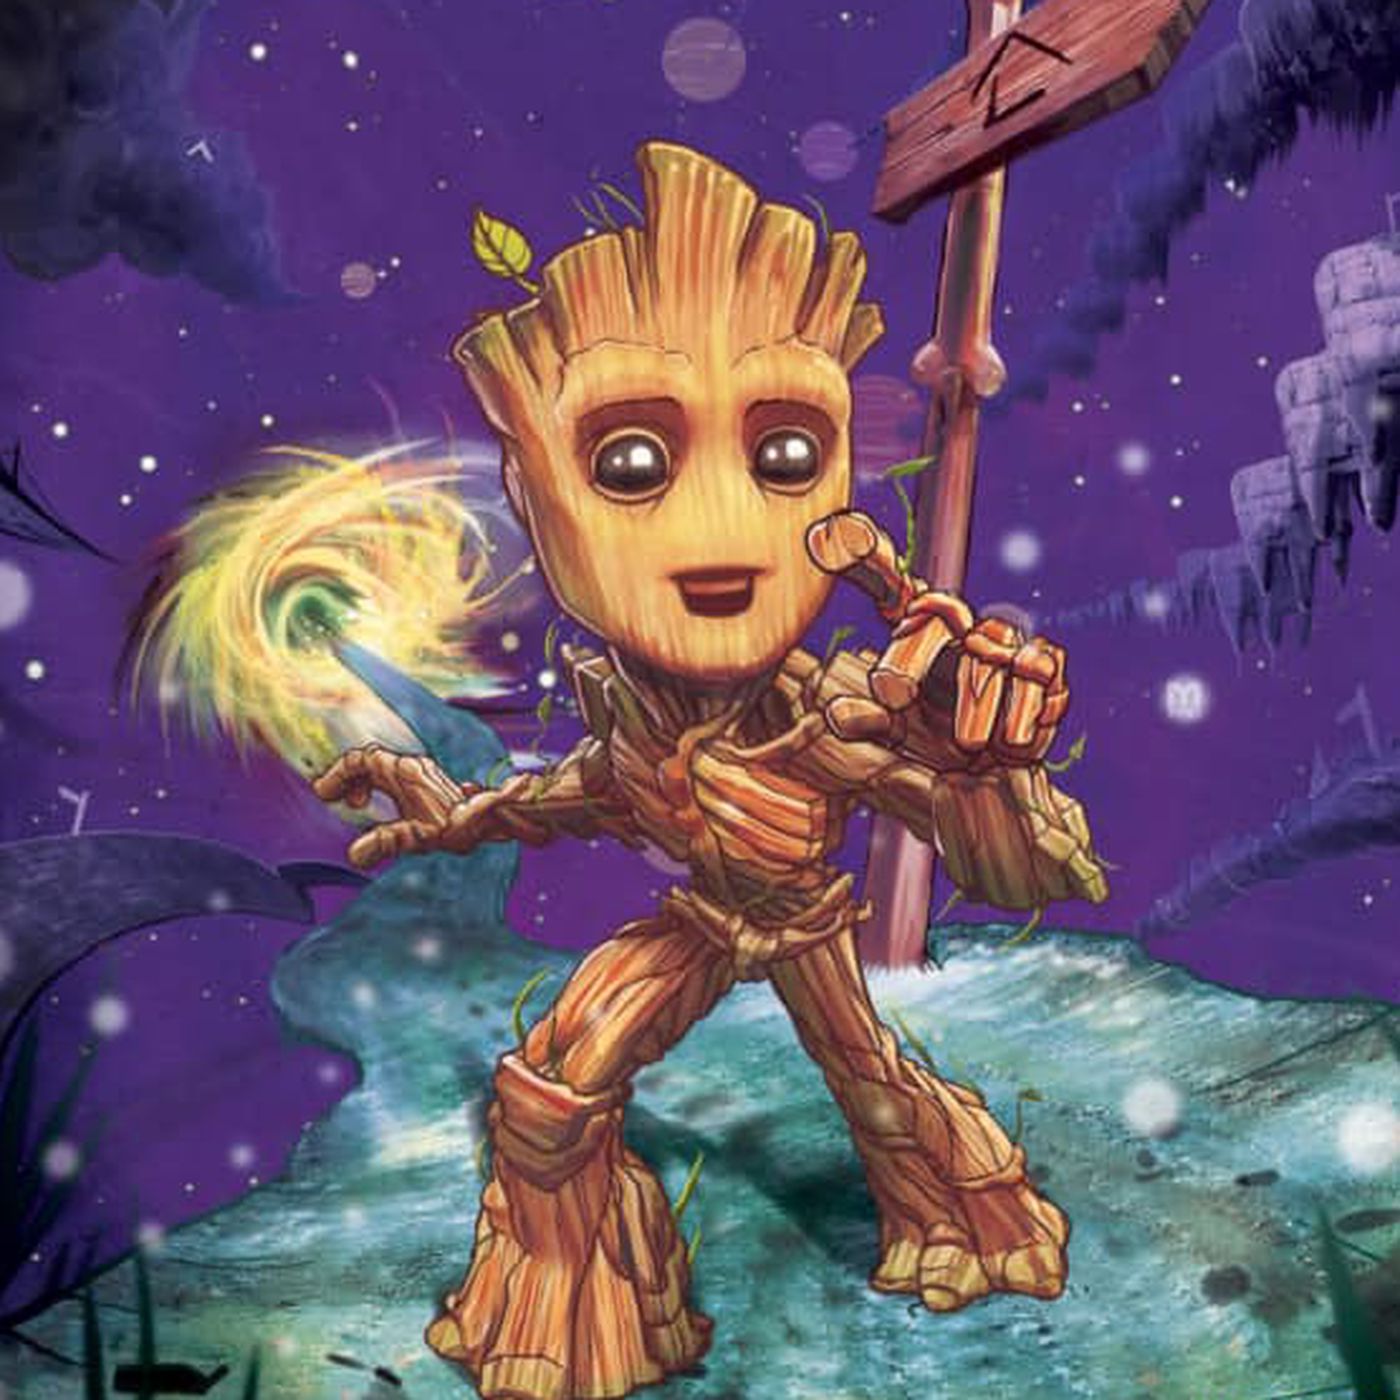 Baby Groot pointing at something